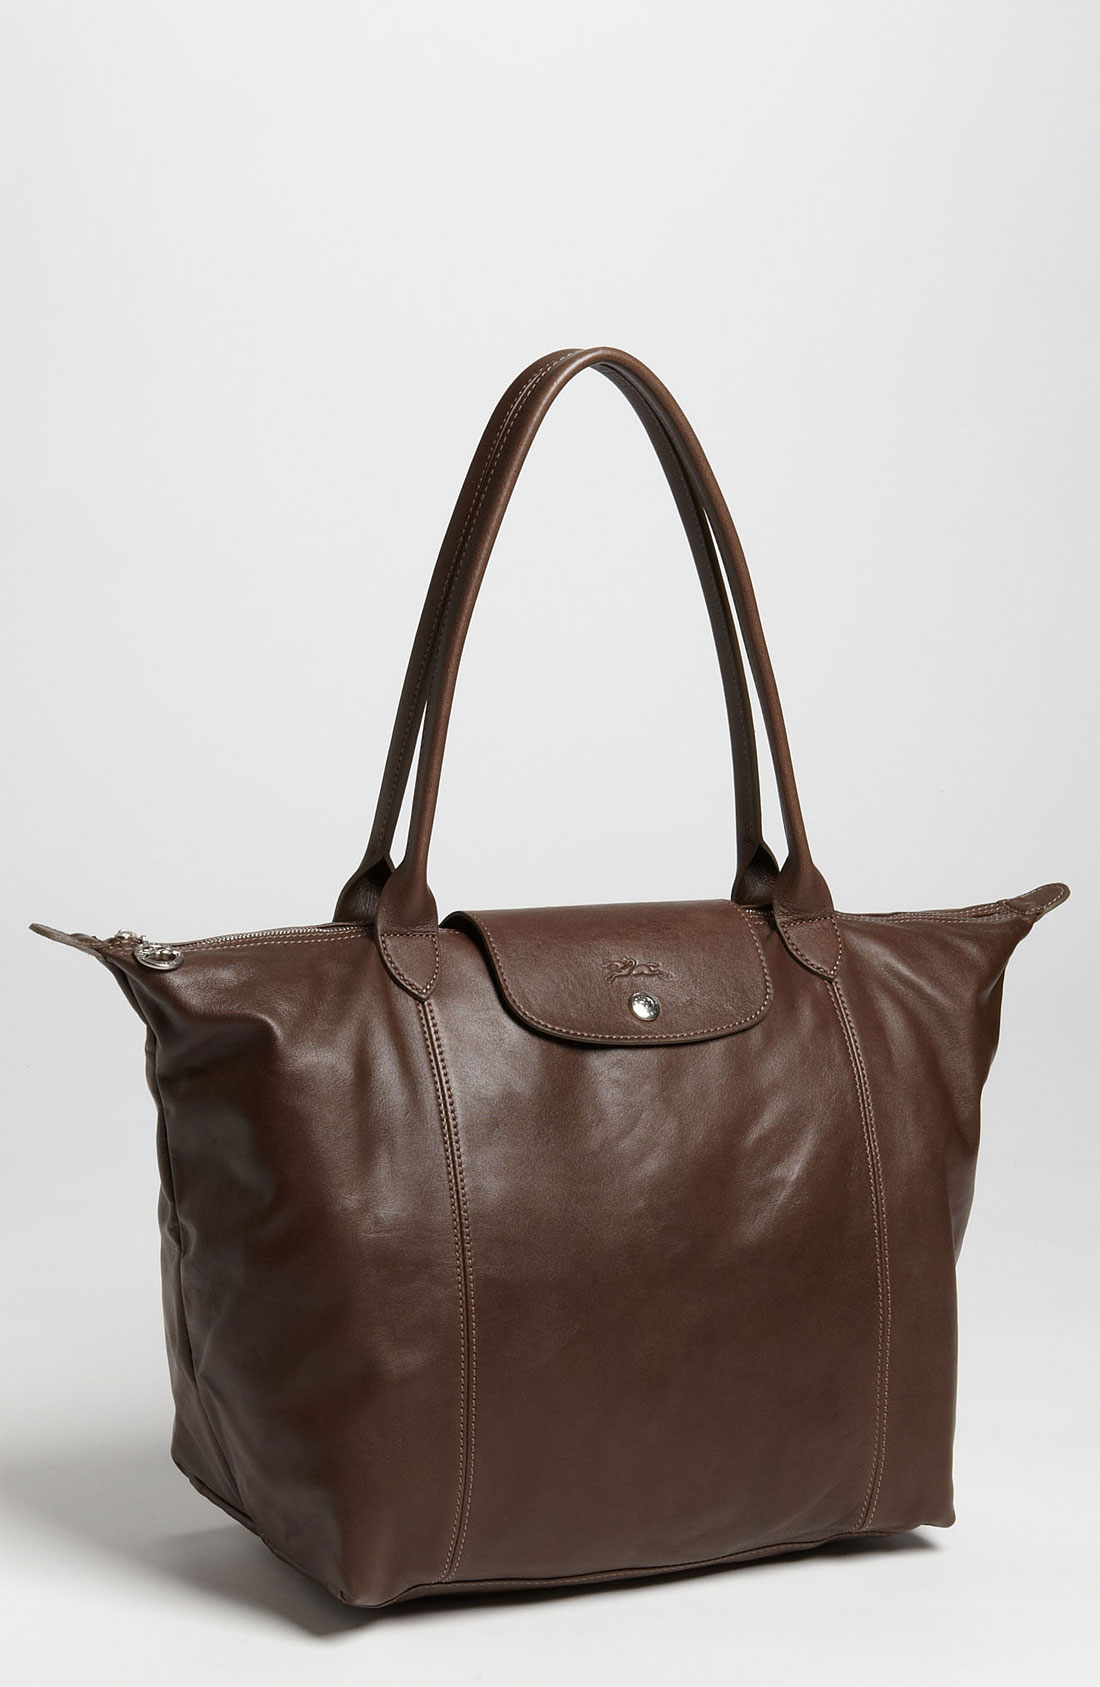 Longchamp Le Pliage Cuir Leather Tote in Brown (taupe) | Lyst